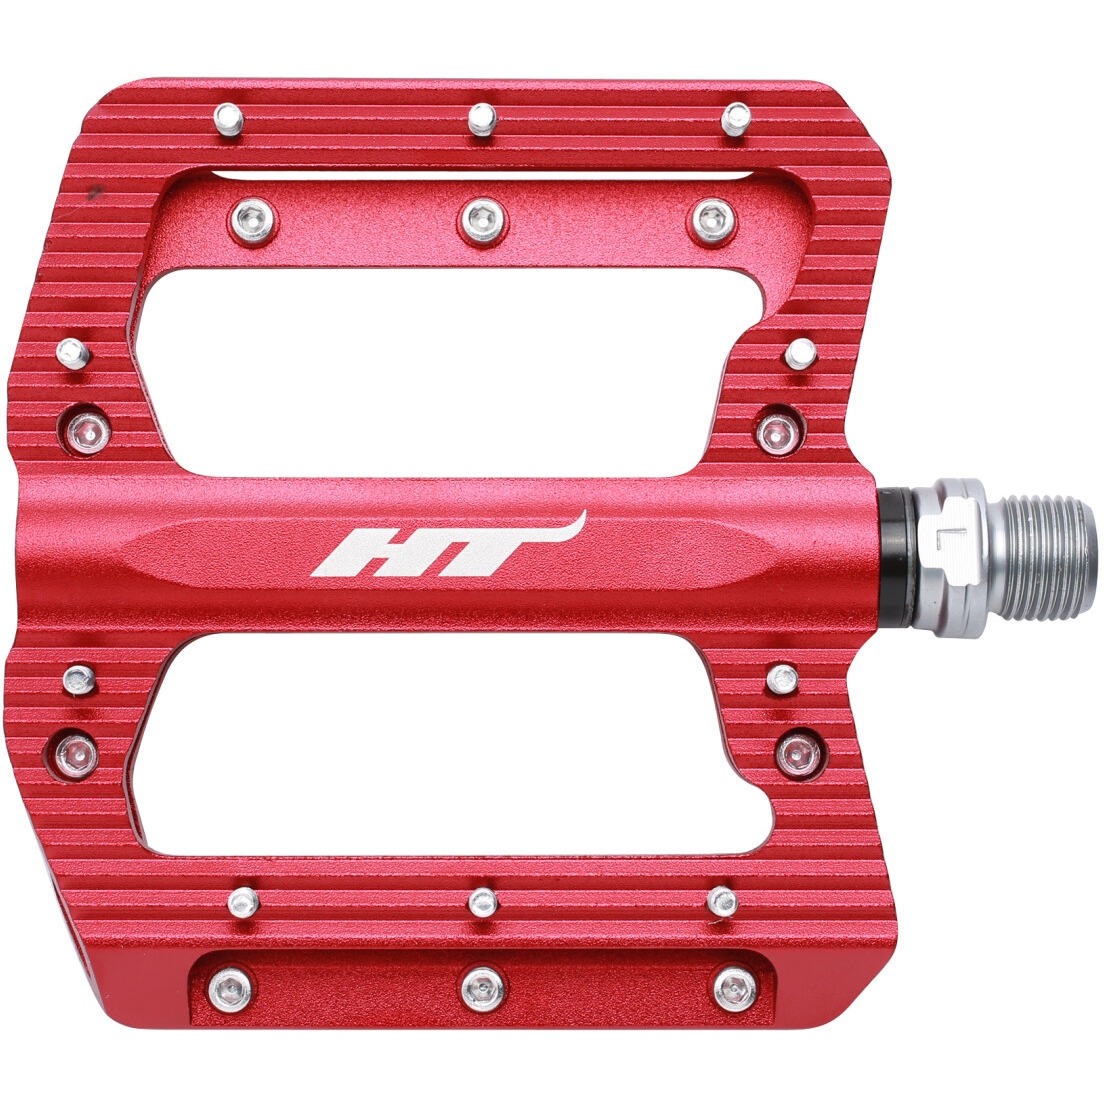 Image of HT ANS01 NANO Flat Pedal - red